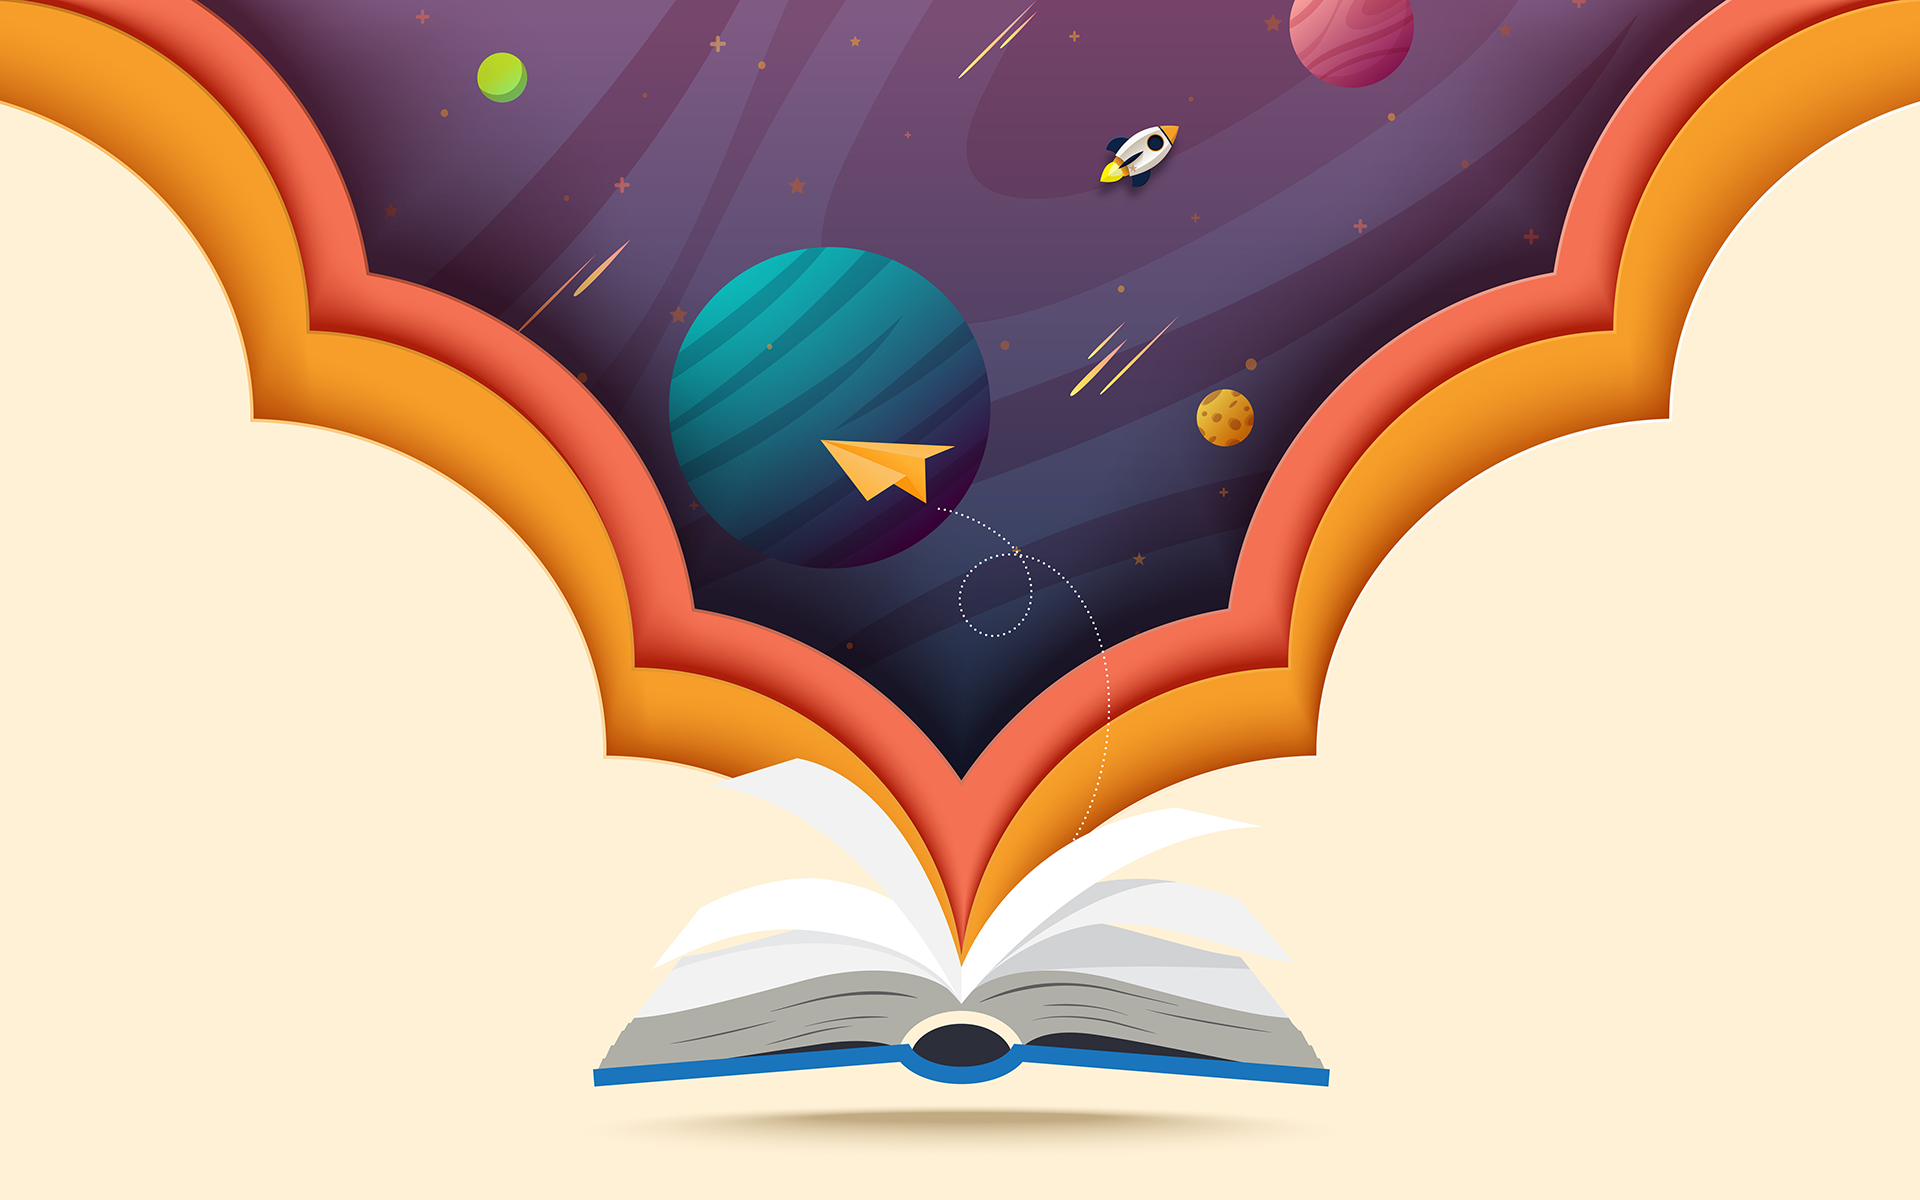 Illustration of an opened book with a space scene coming from the pages.